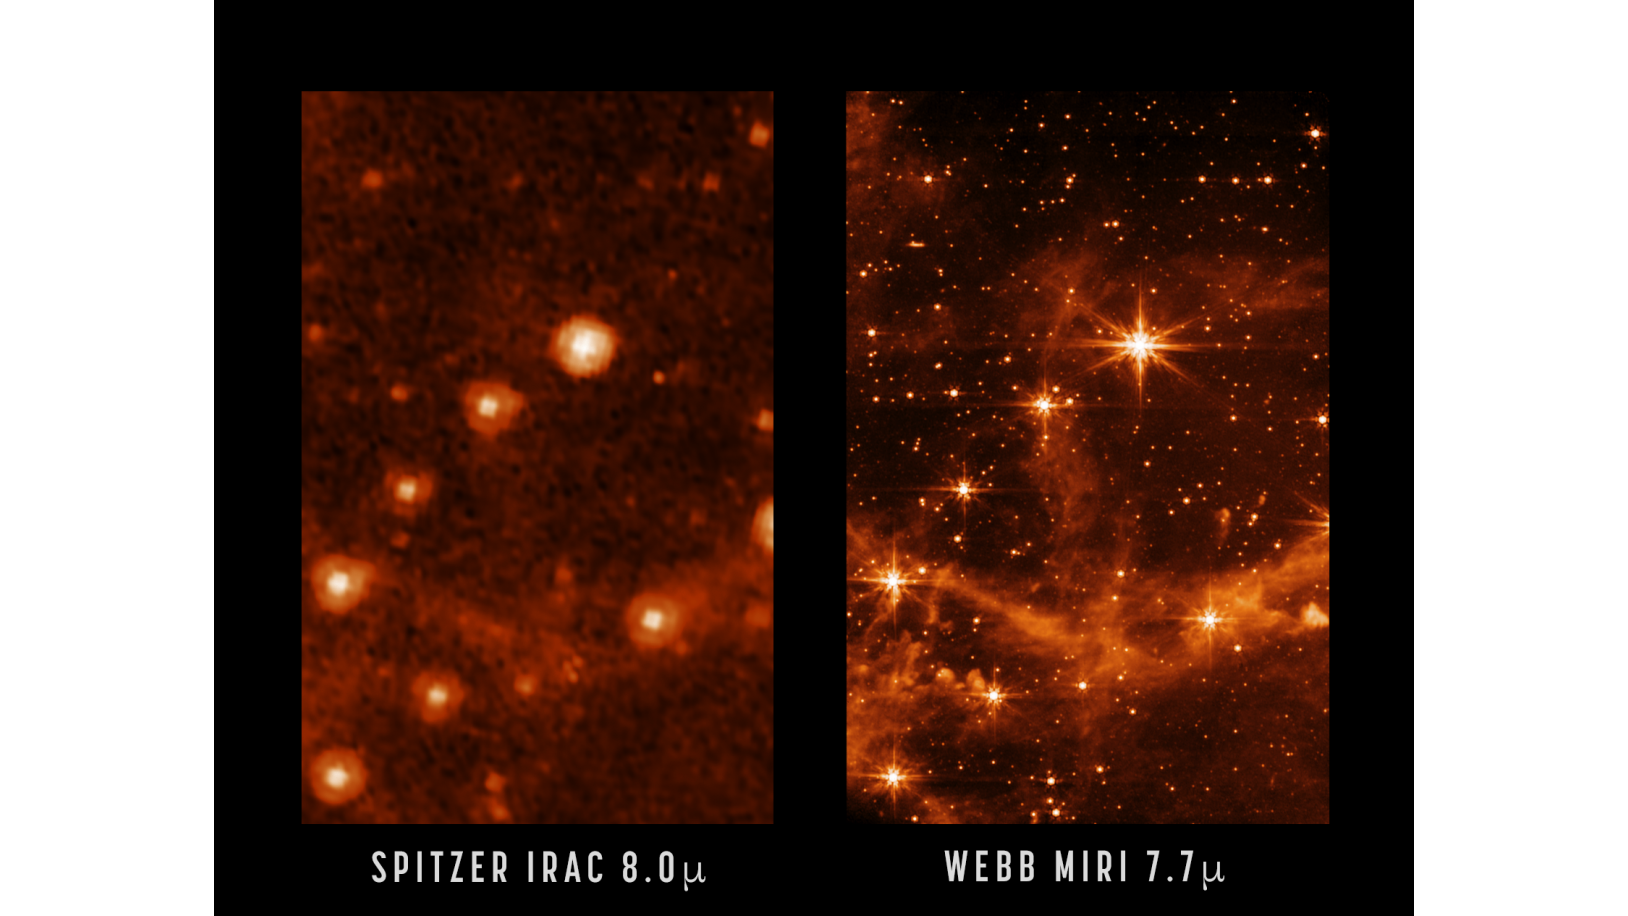 A comparison of views of the same portion of the sky as seen by NASA's decommissioned Spitzer Space Telescope and the newly launched James Webb Space Telescope.